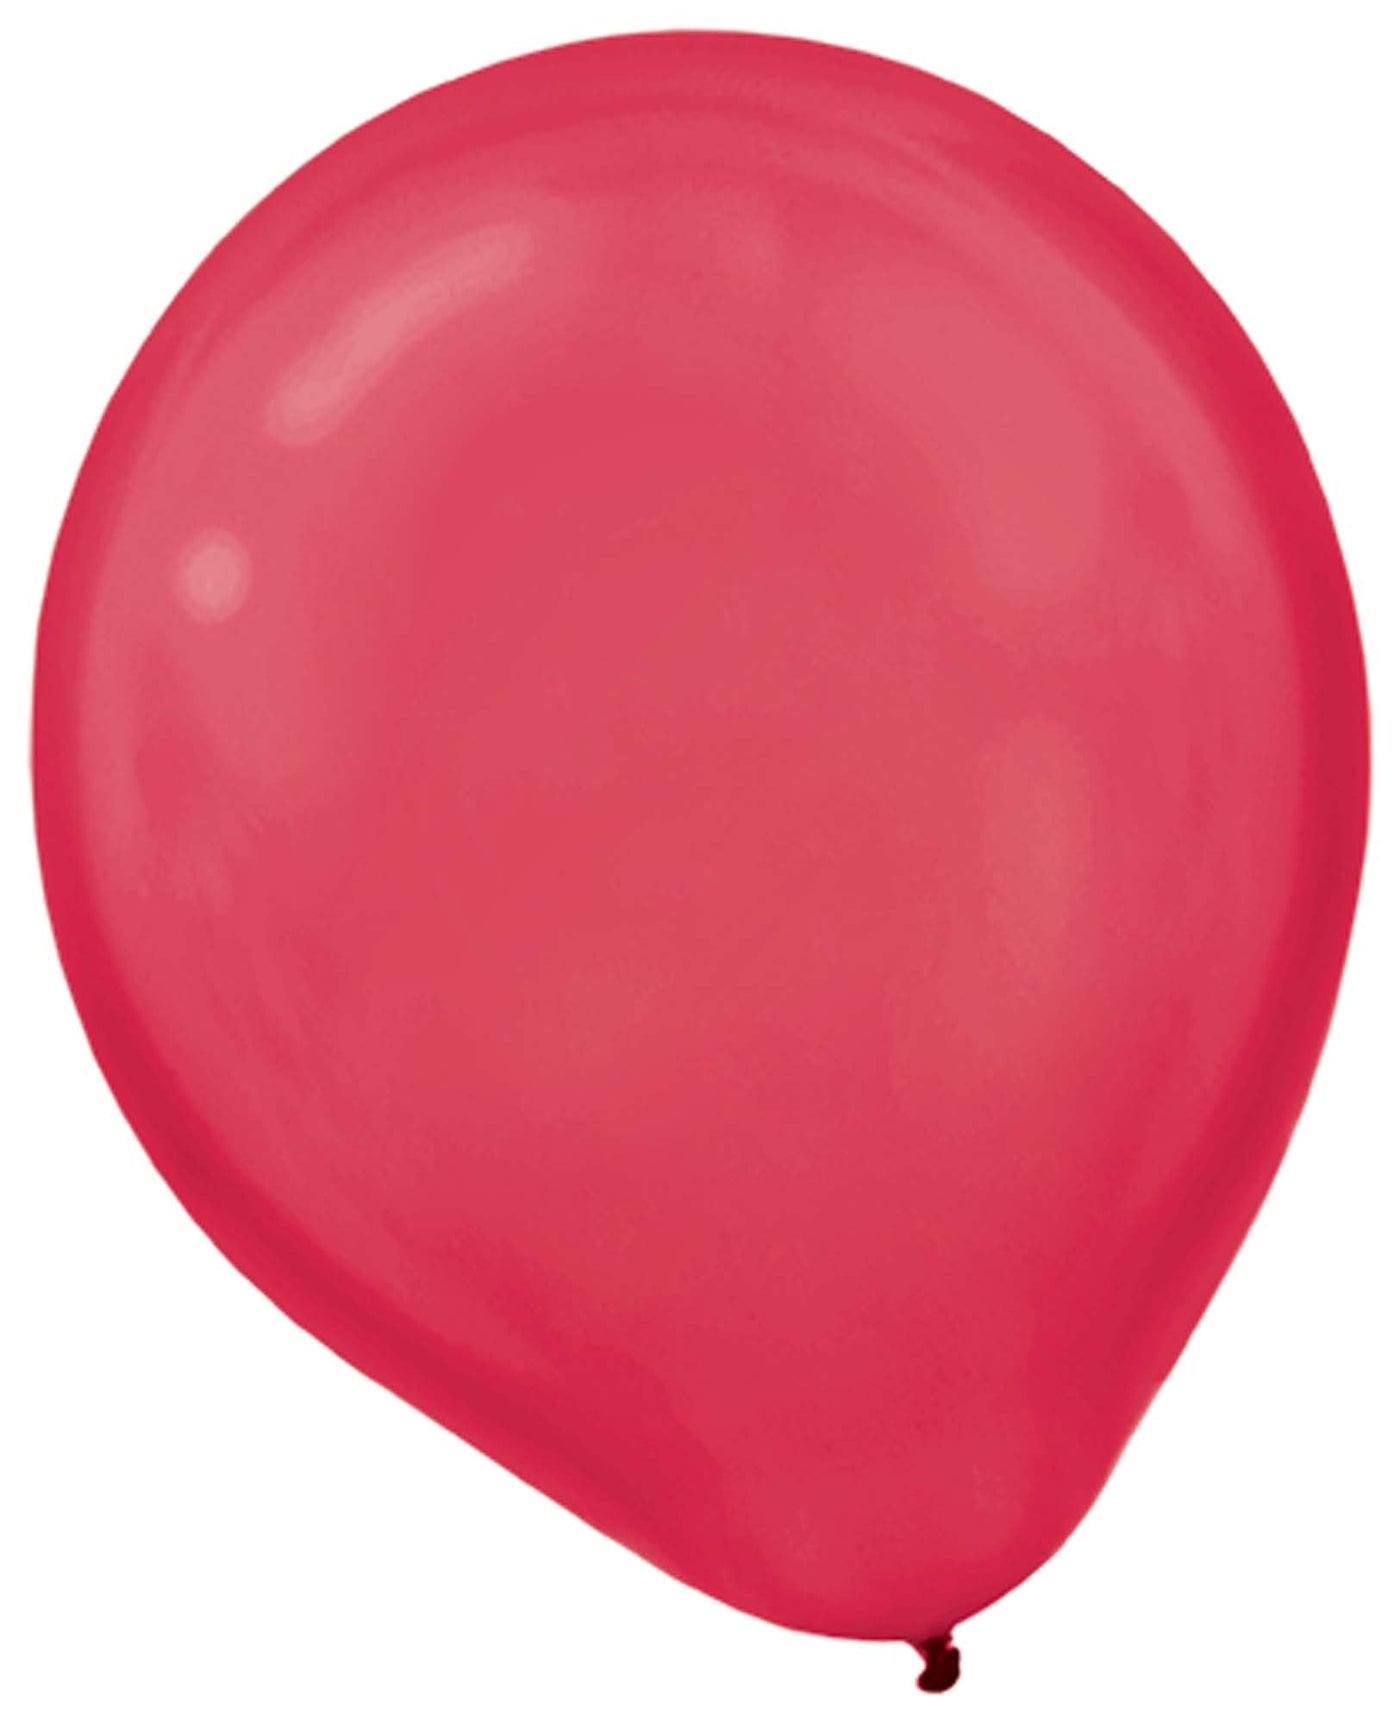 Red Pearlized Latex Balloons 100ct - JJ's Party House